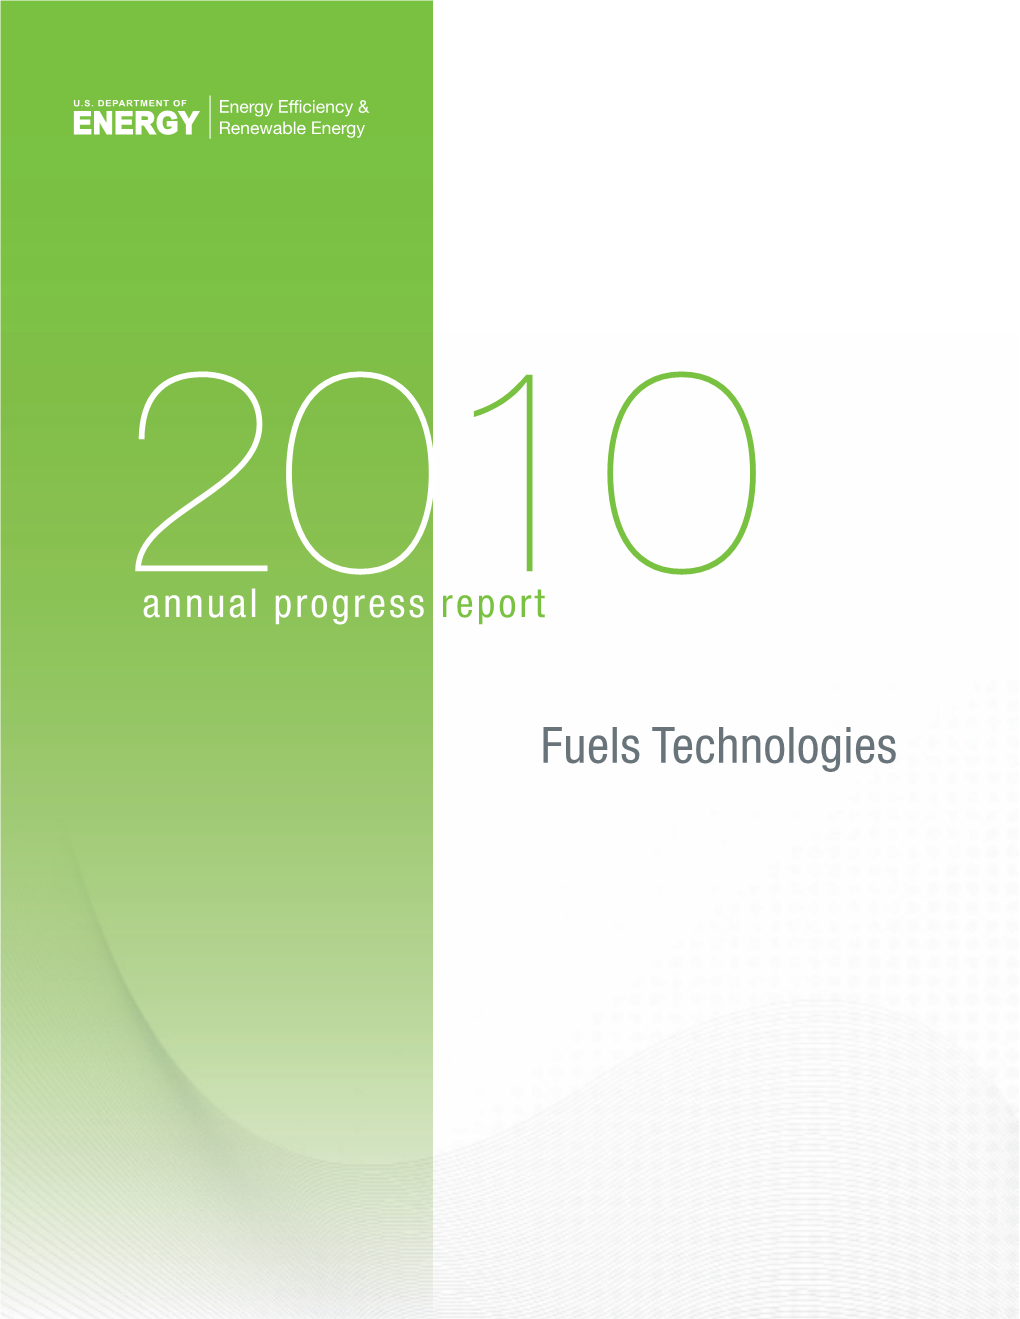 2010 Annual Progress Report for Fuels Technologies